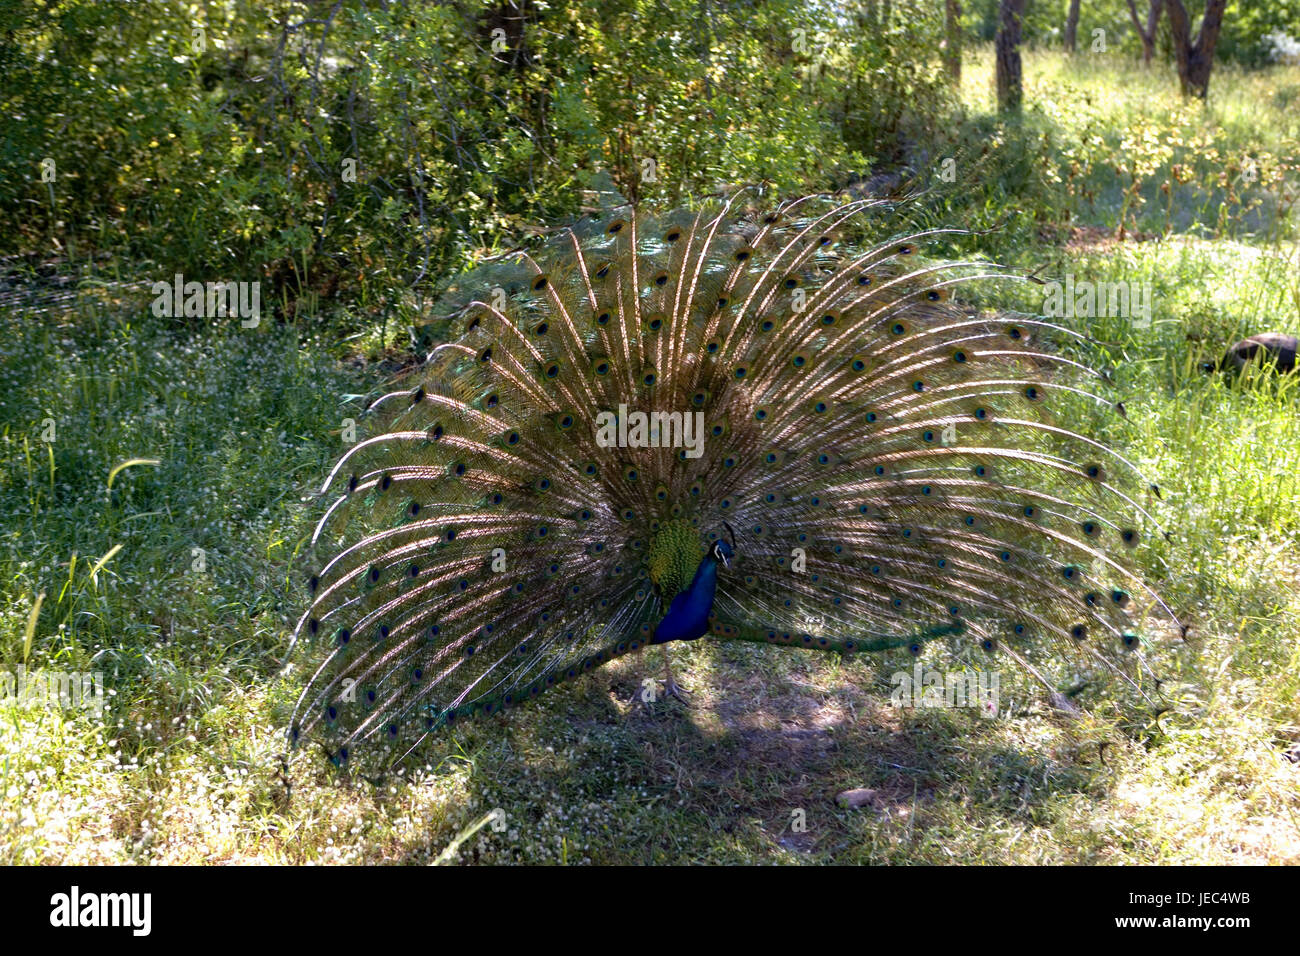 Greece, Rhodes, Filerimos, blue peacock, cloister park, cloister park, park, animal, peacock, Phasianidae, gallinaceous birds, at the side, 'radian', admirably, peacock's feathers, manly, decorated, plumage, plumage, feathers, Stock Photo